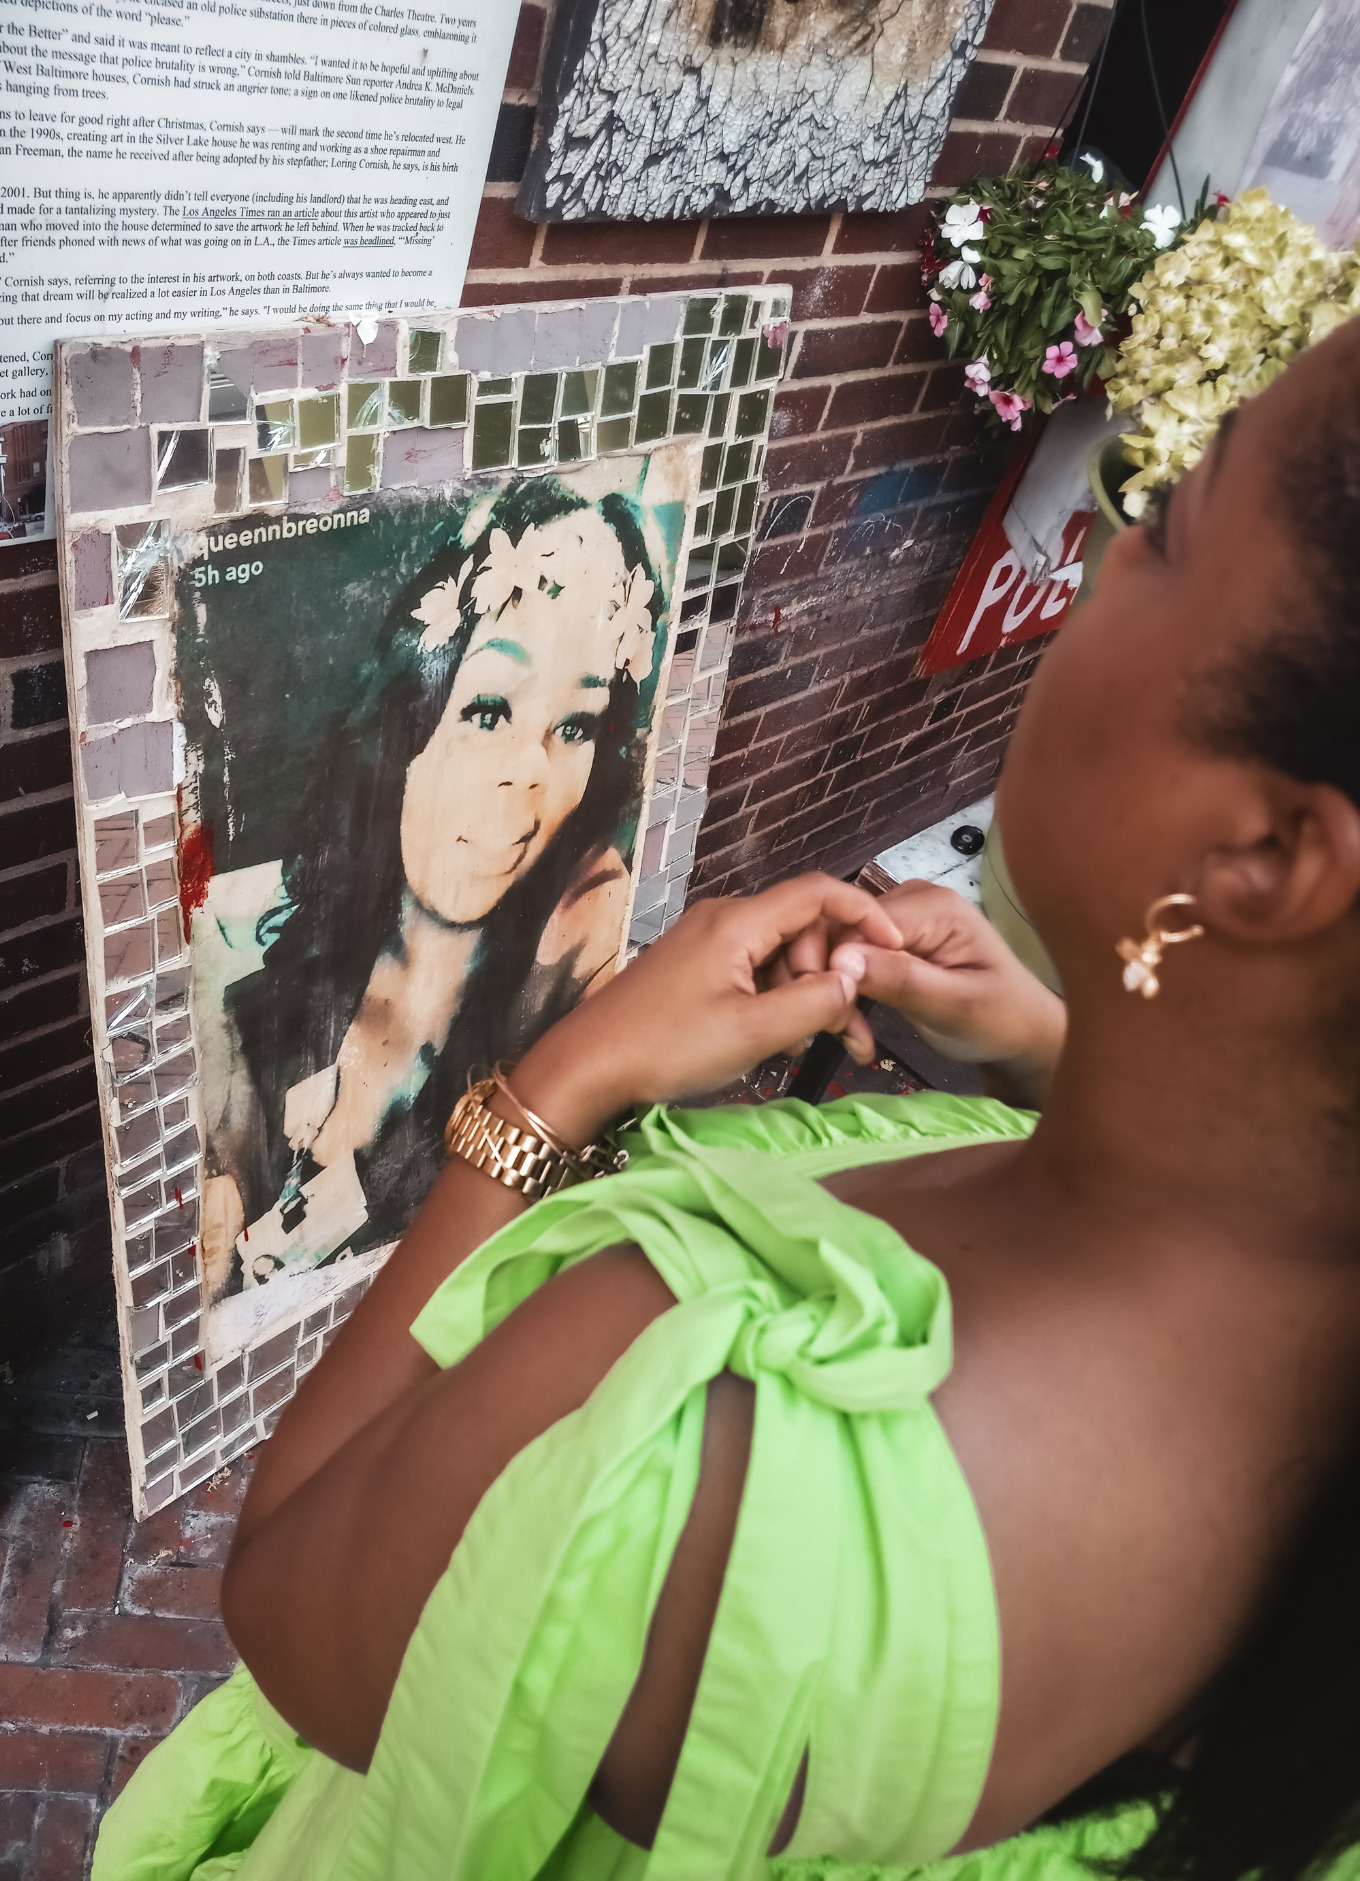 This Bahamian Gyal blogger, Rogan stands in front of a memorial for Breonna Taylor, a medical worker who was shot and killed by police officers in her Louisville, Kentucky apartment.